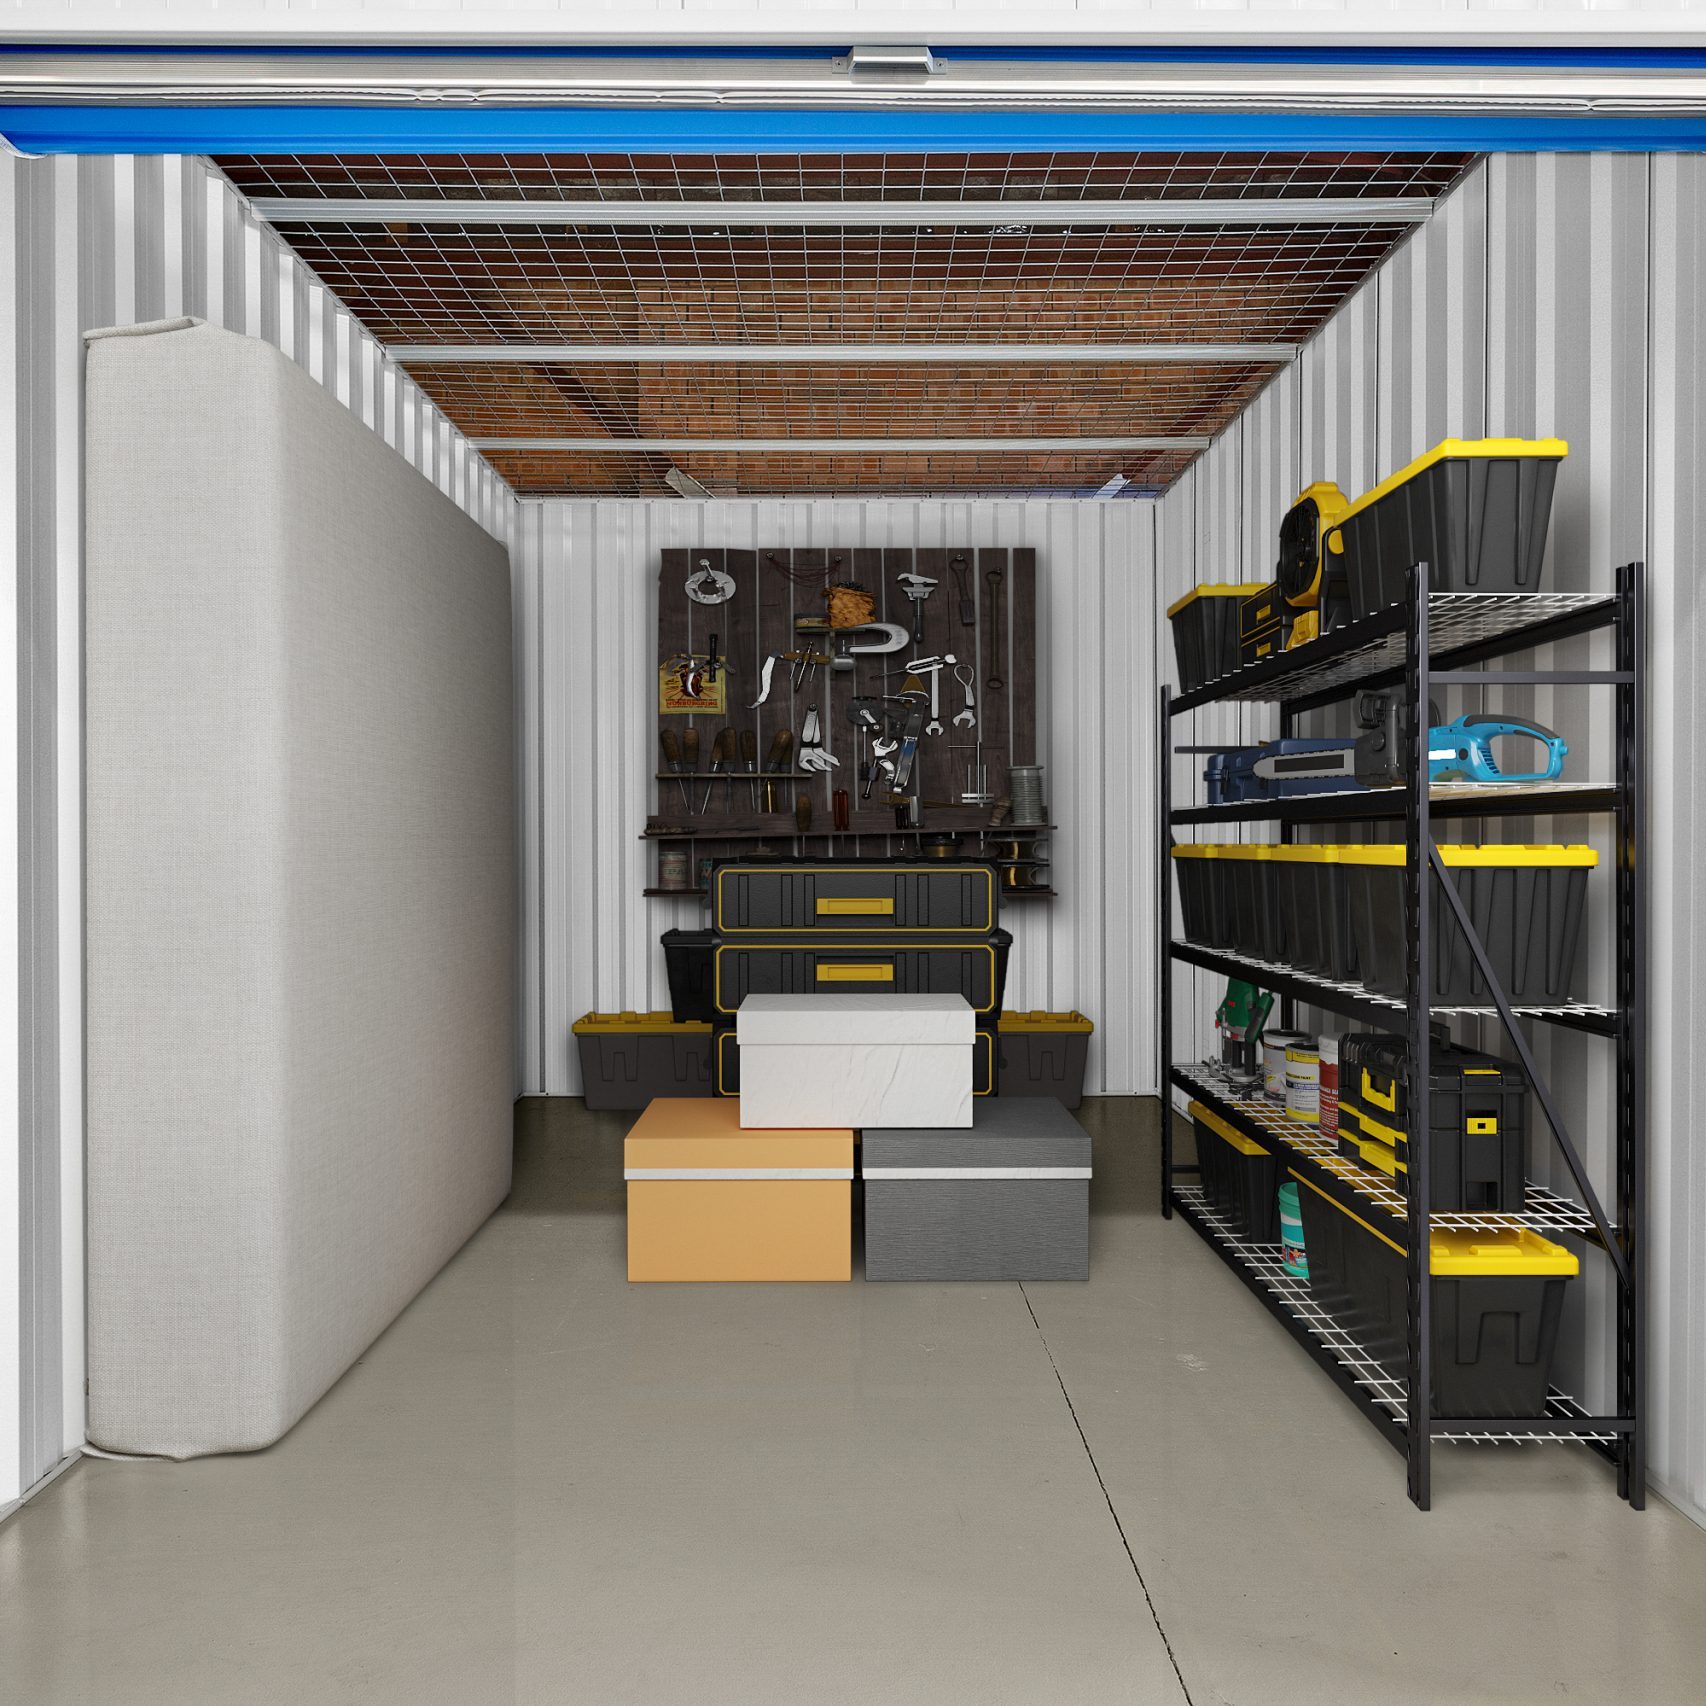 The inside of a storage unit with shelves and tools.